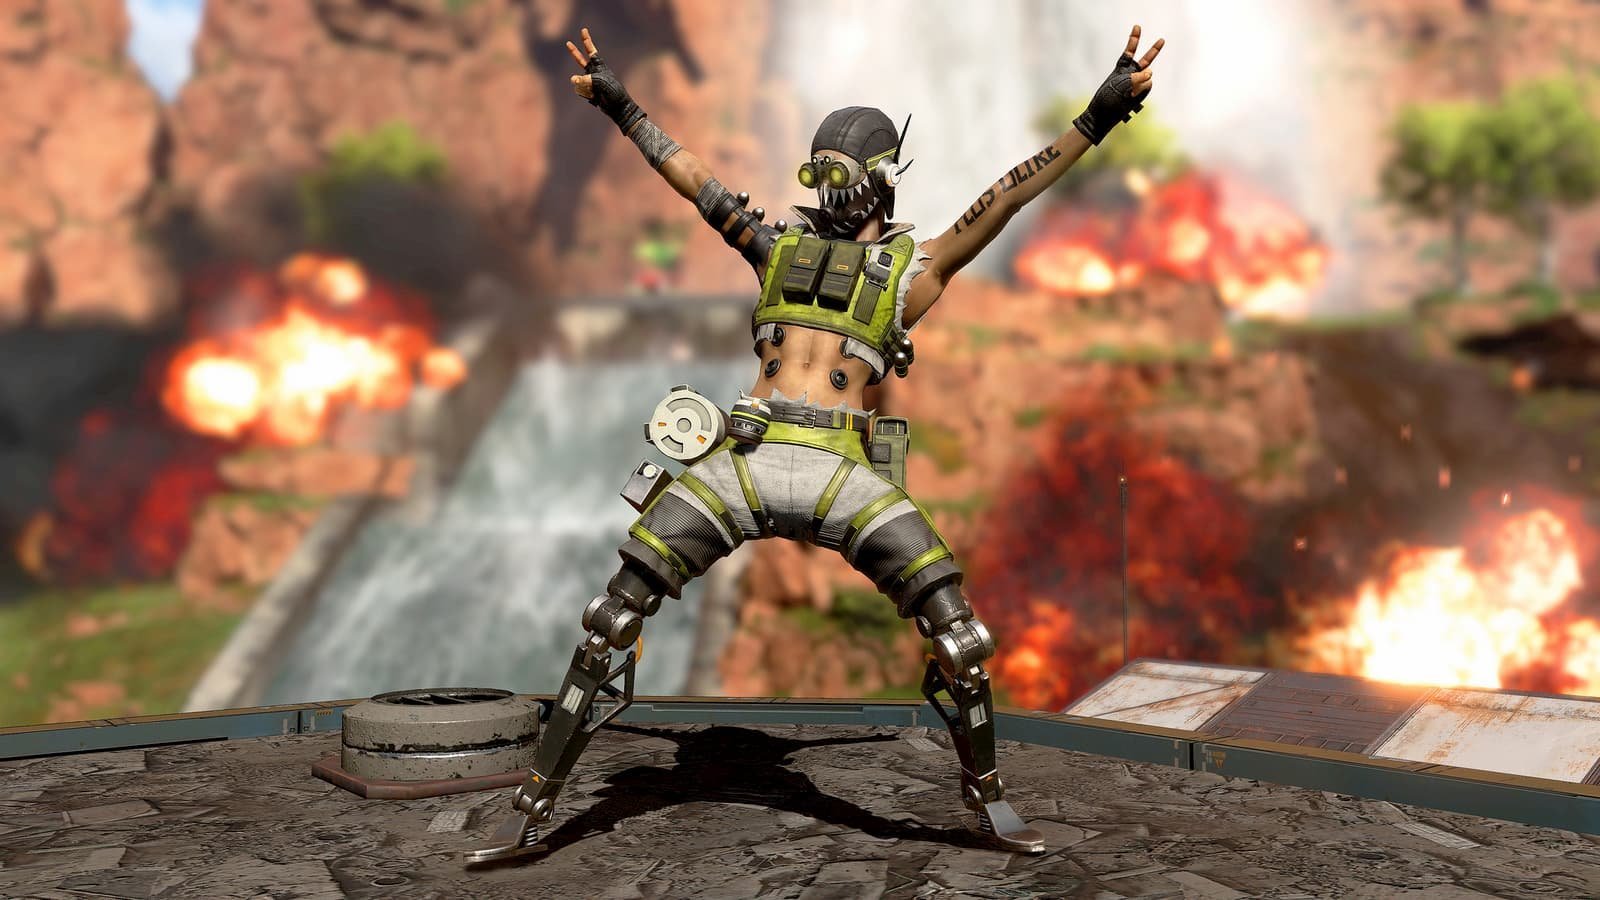 apex legends battle pass and new character octane are set to arrive tomorrow